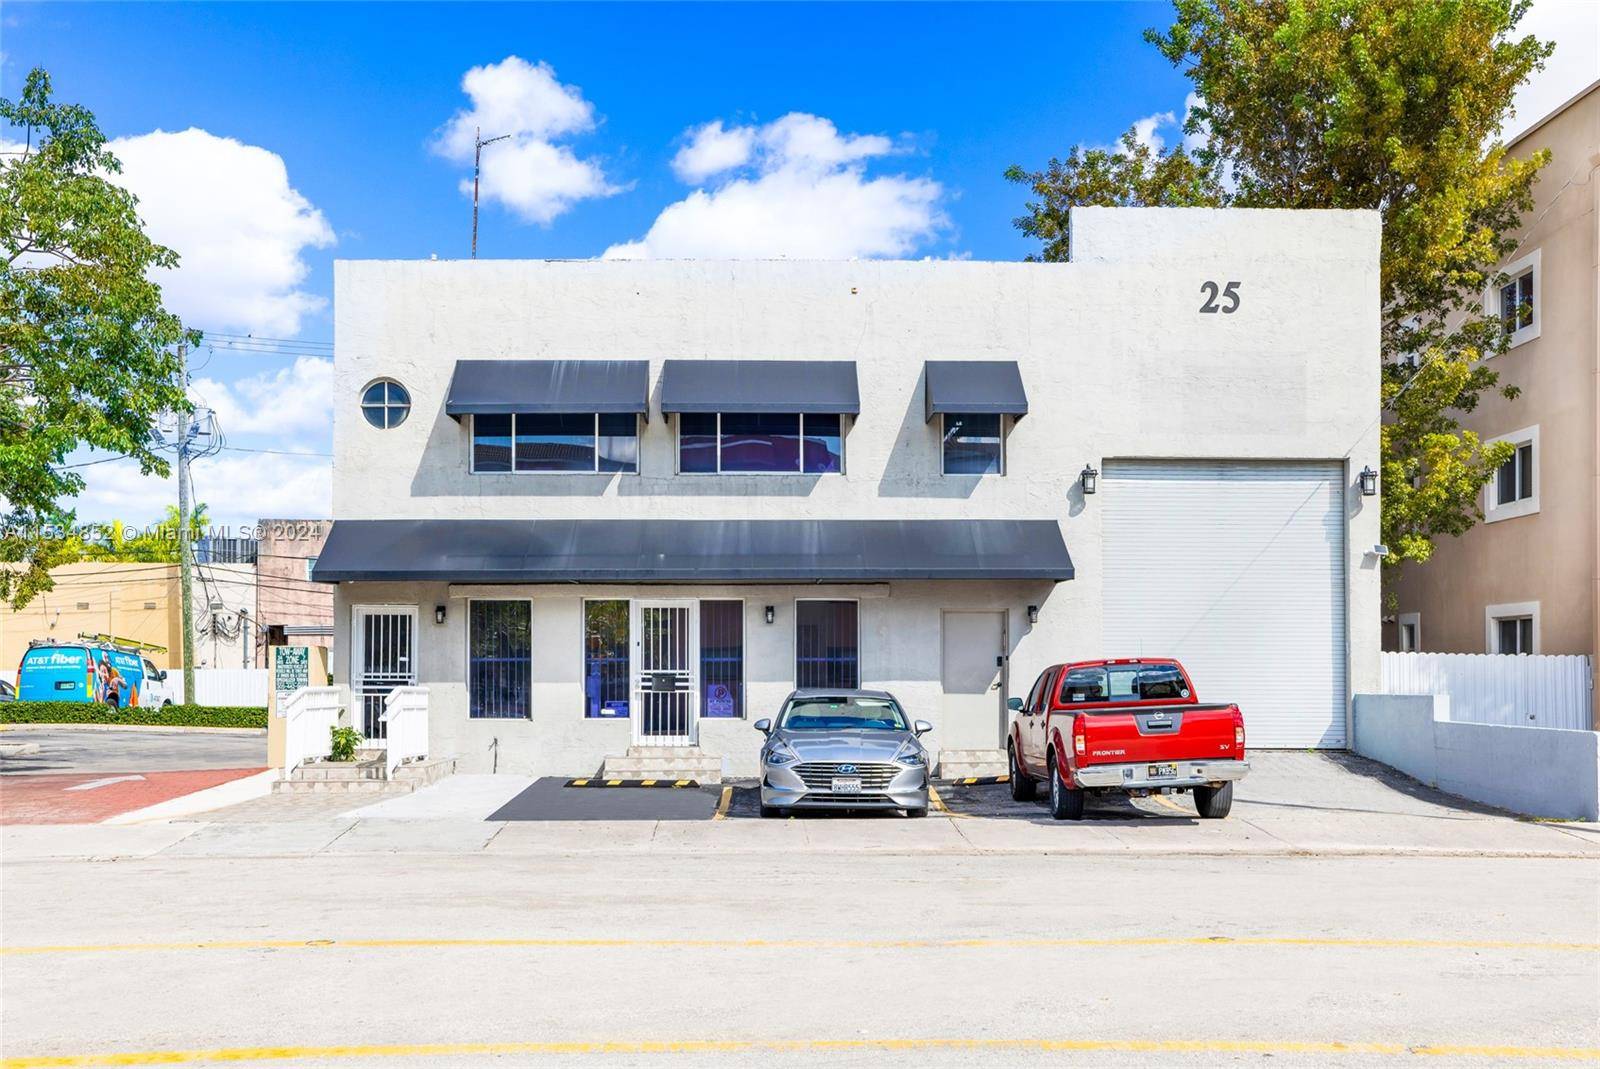 We present 25 E 4 ST, a meticulously renovated office flex space in the heart of Hialeah, sitting one block from City Hall and the heart of the city.